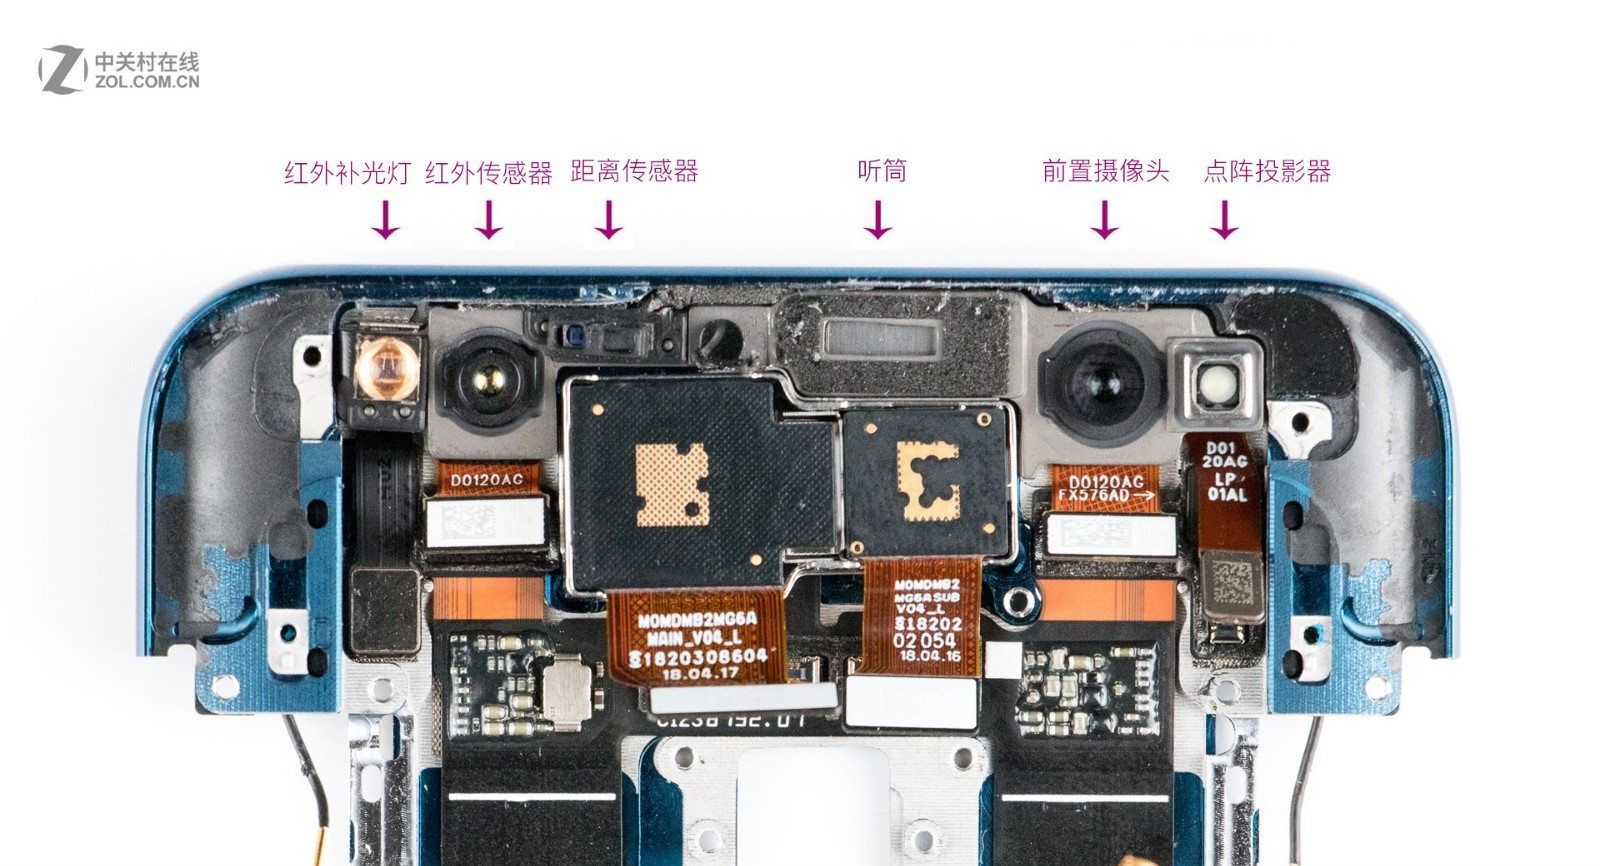 The camera/sensor housing for the OPPO Find X.